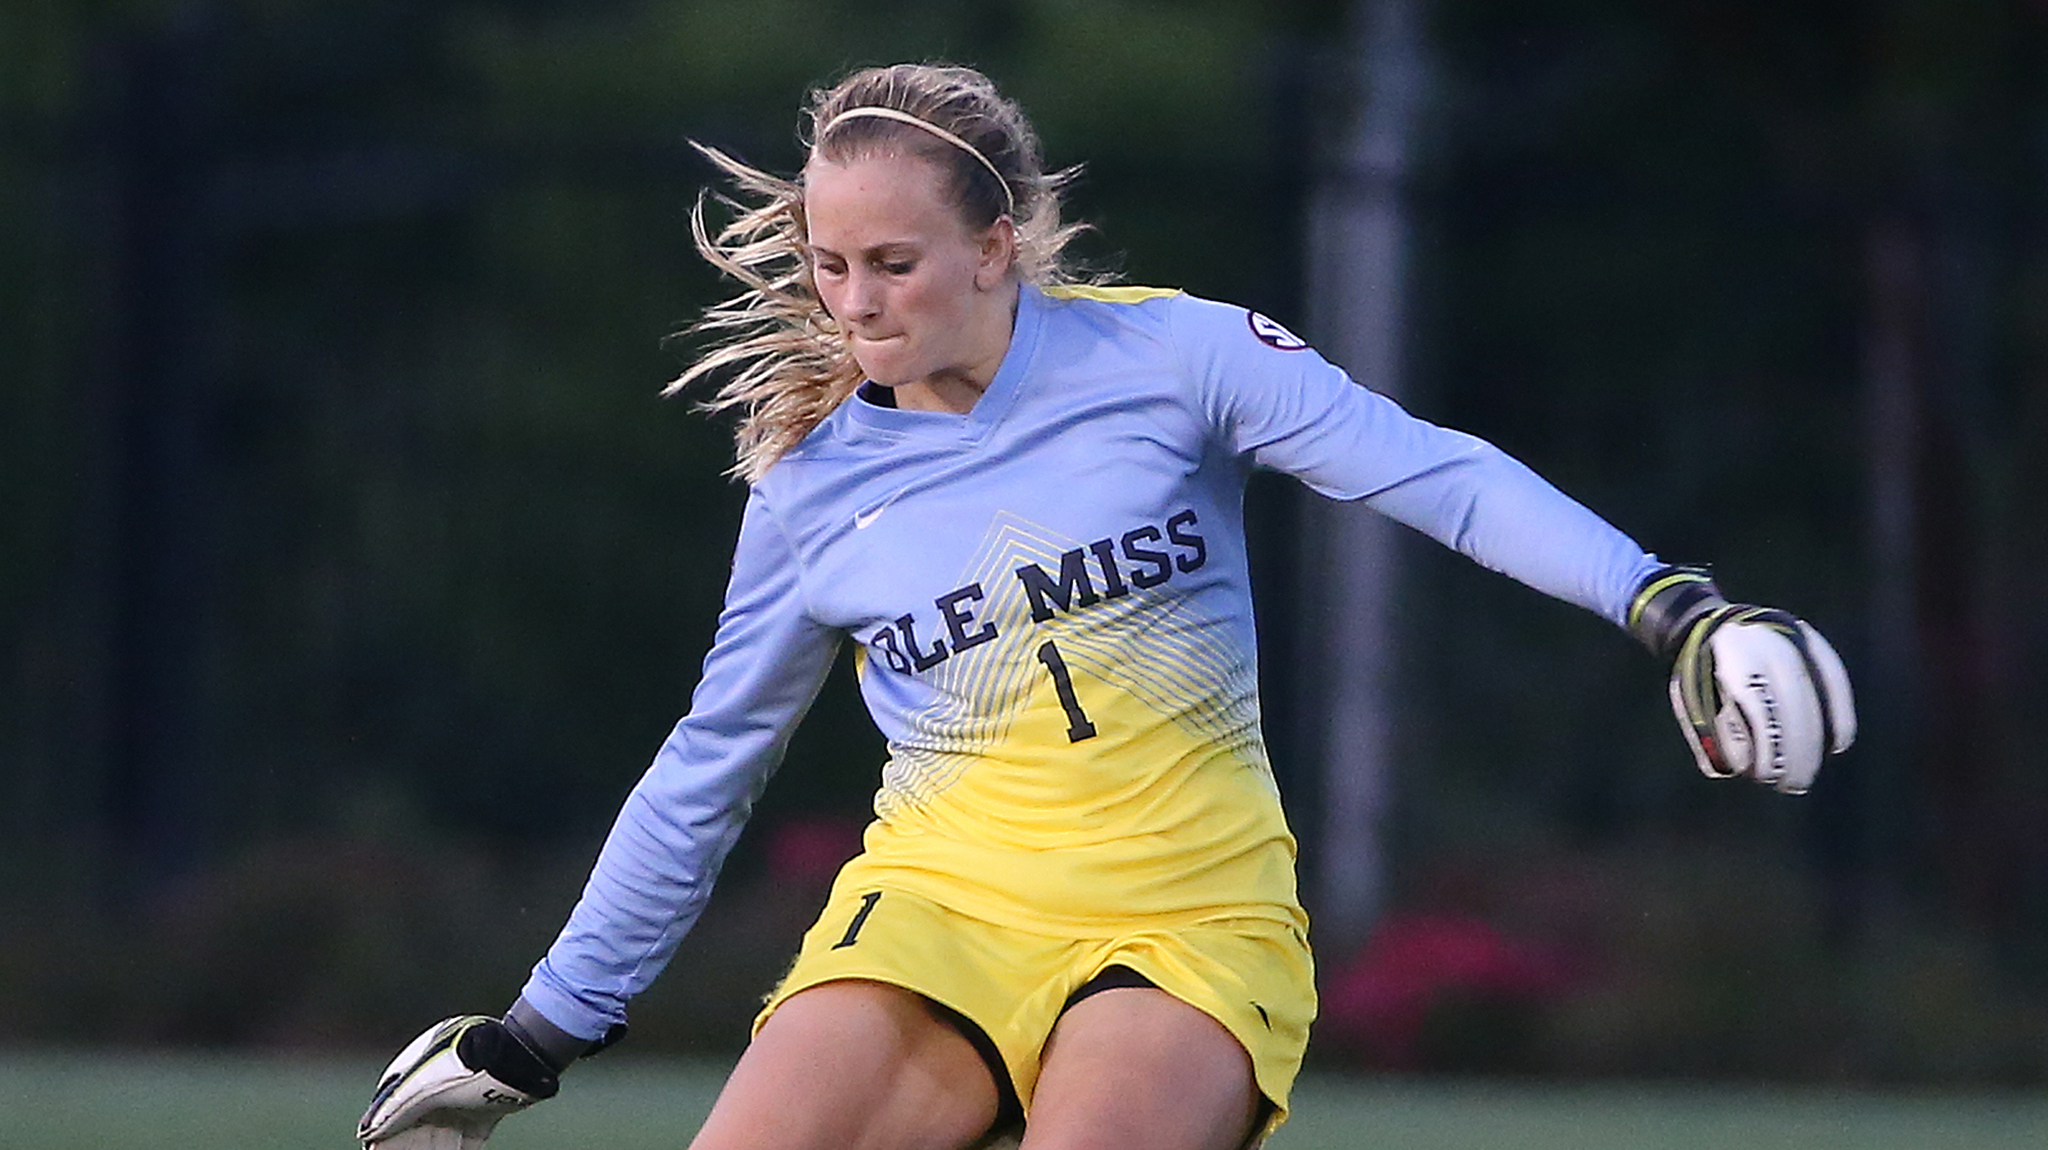 McCormick Named to SEC Community Service Team - Ole Miss News